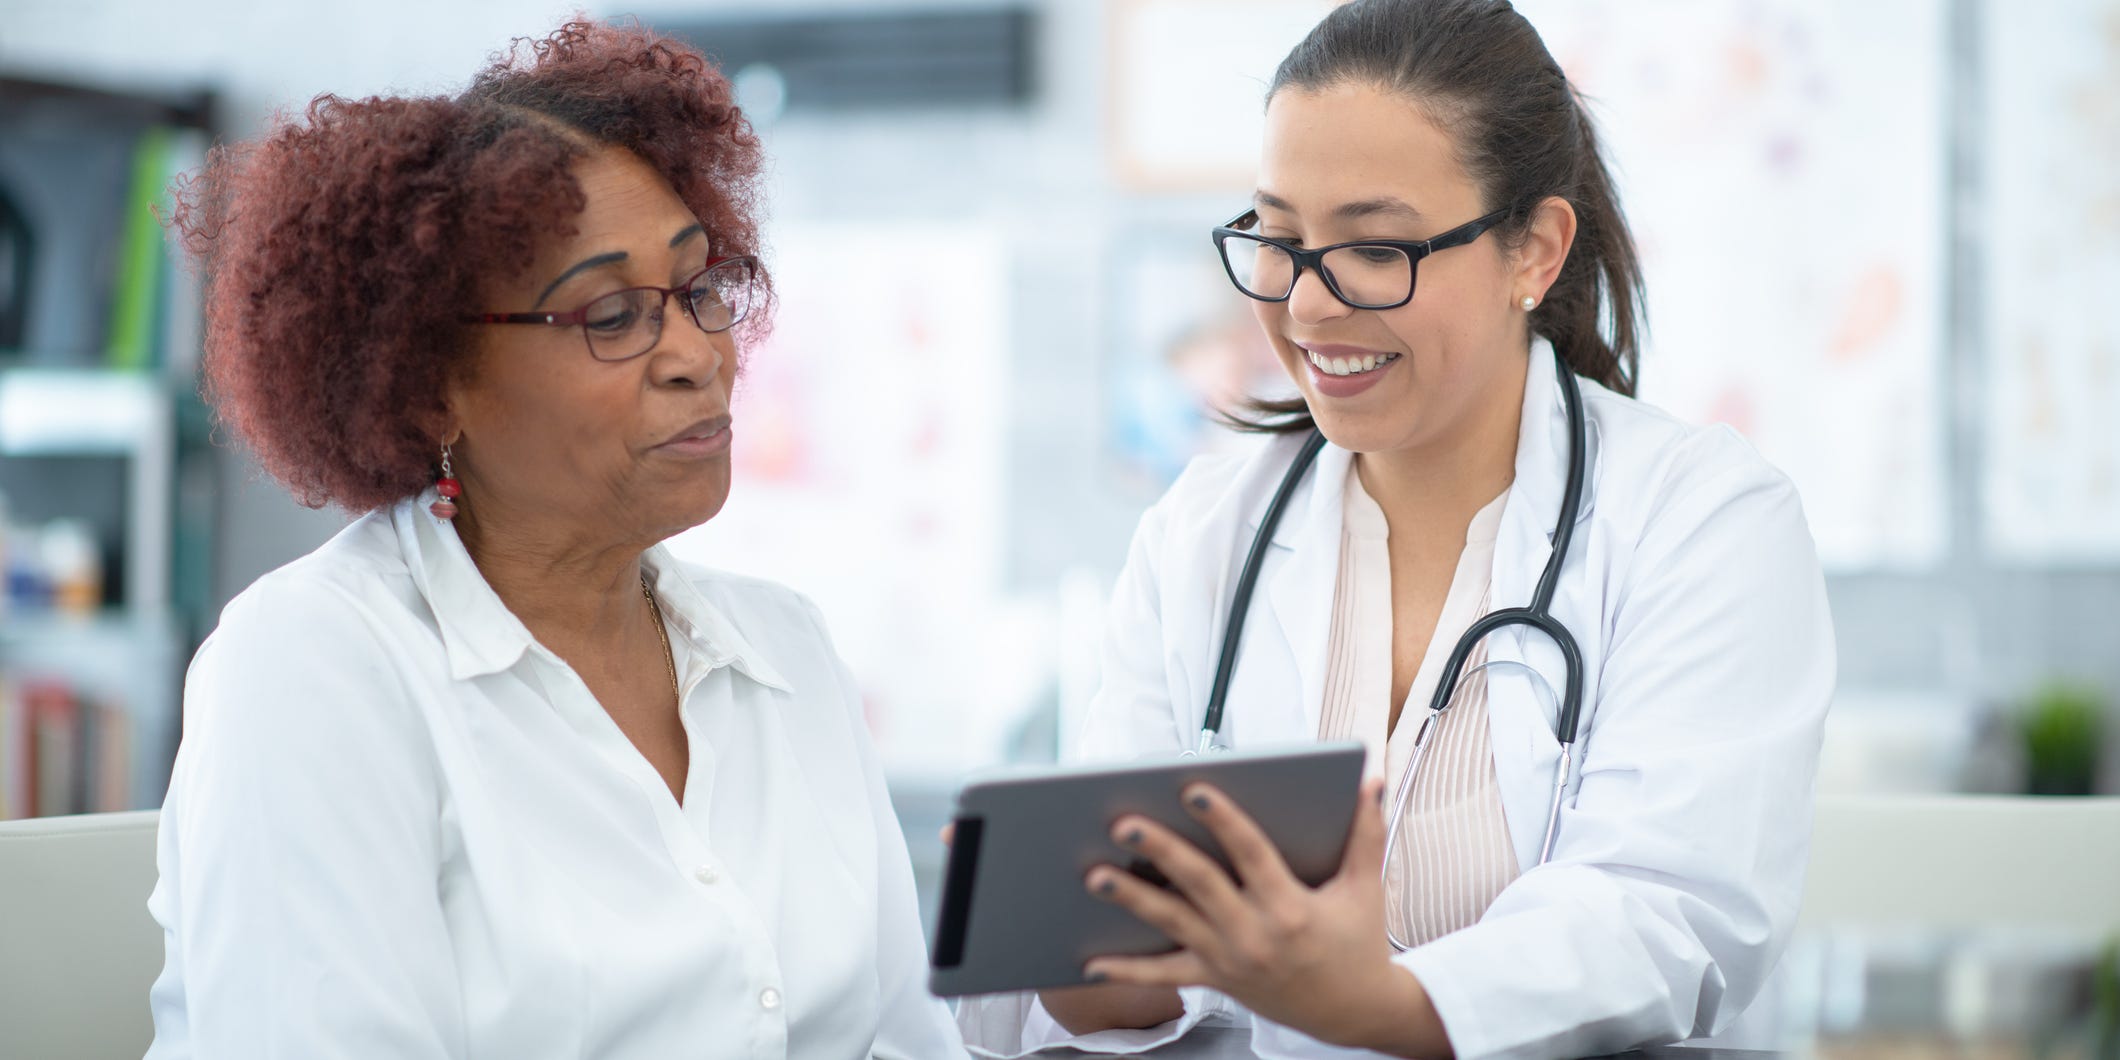 Doctor and mature adult woman look at medical records or results together on a tablet.